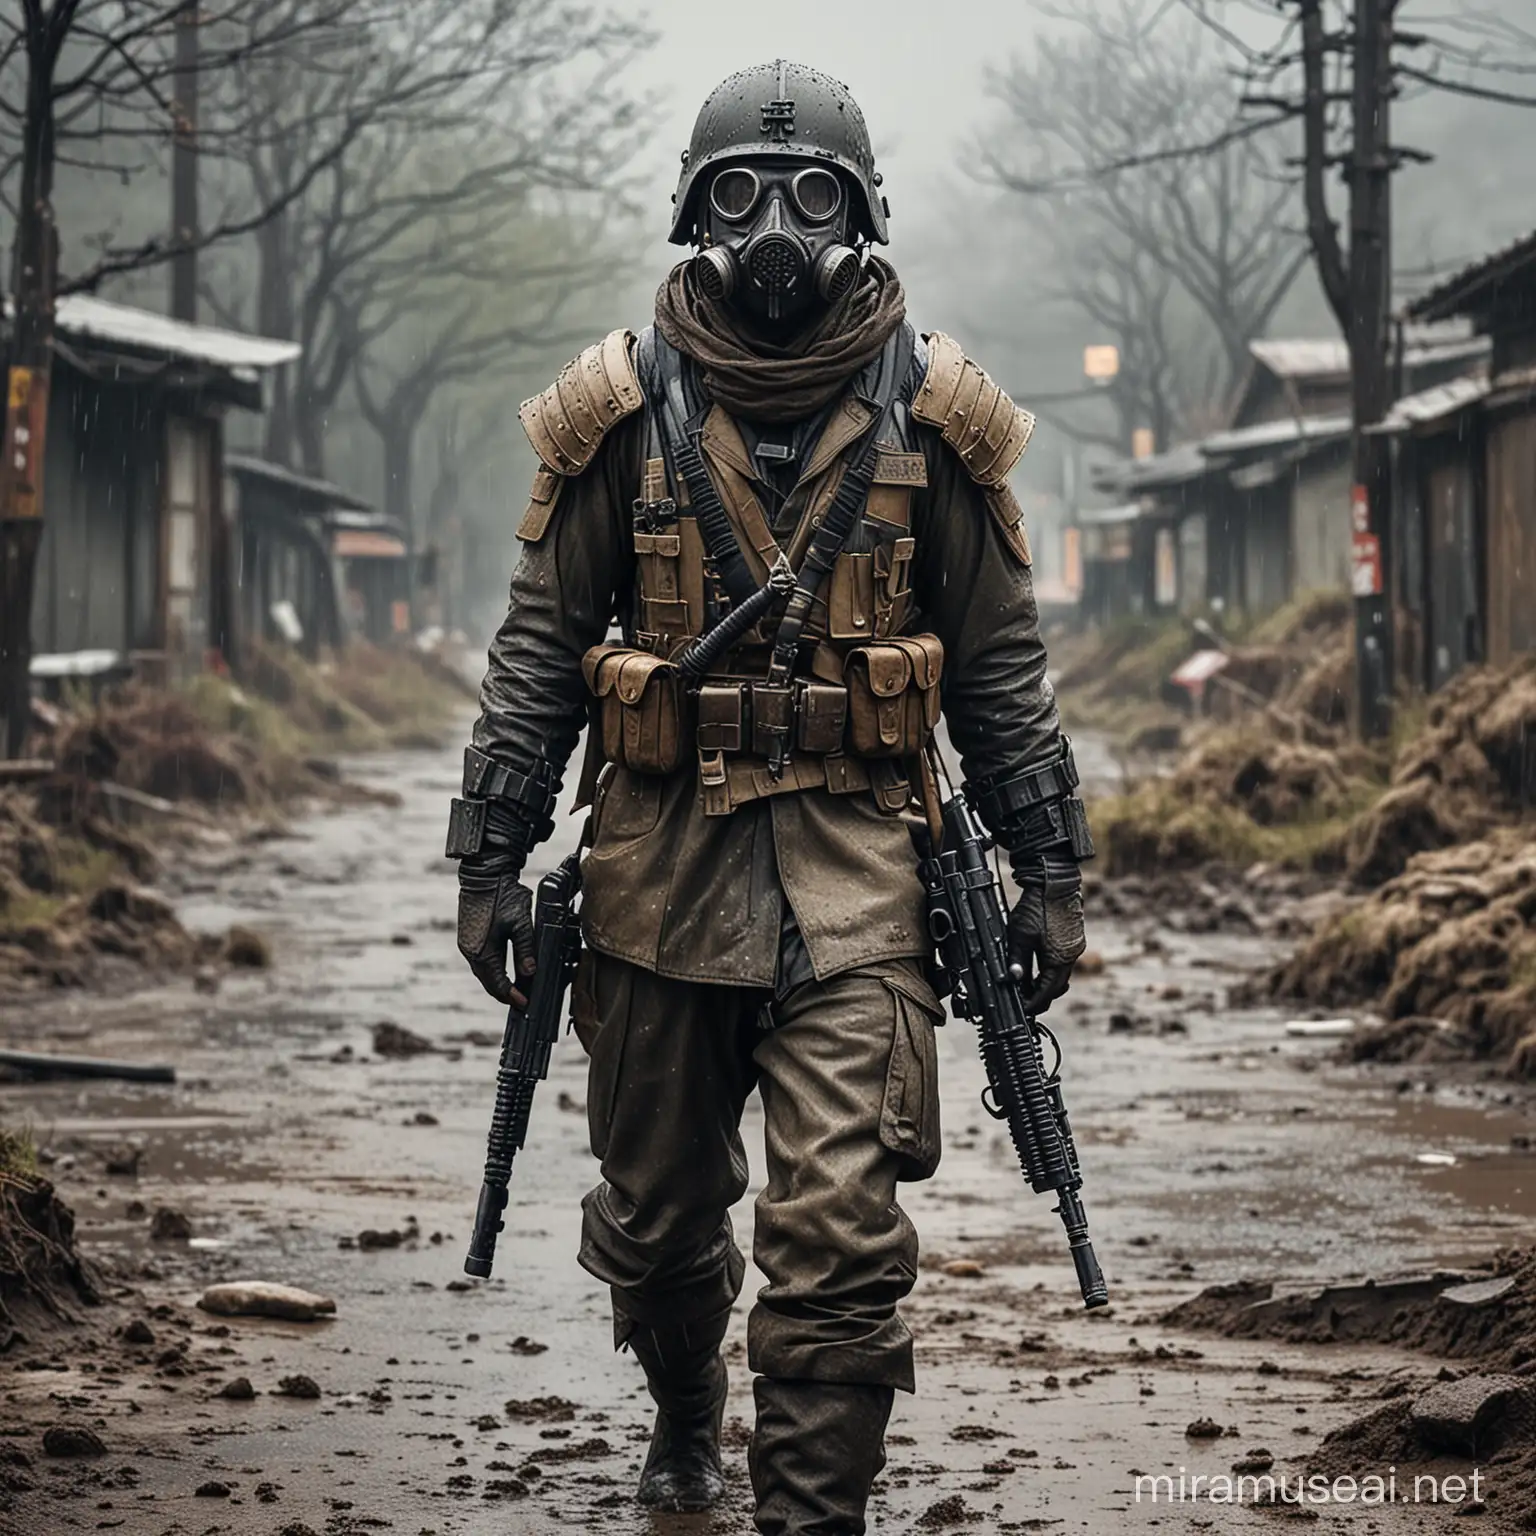 Japan soldier in post post apocalyptic world.Rainy weather,ground is mud.He has armor but not new armor,helmet with gas mask and gun.Realistic,detailed  